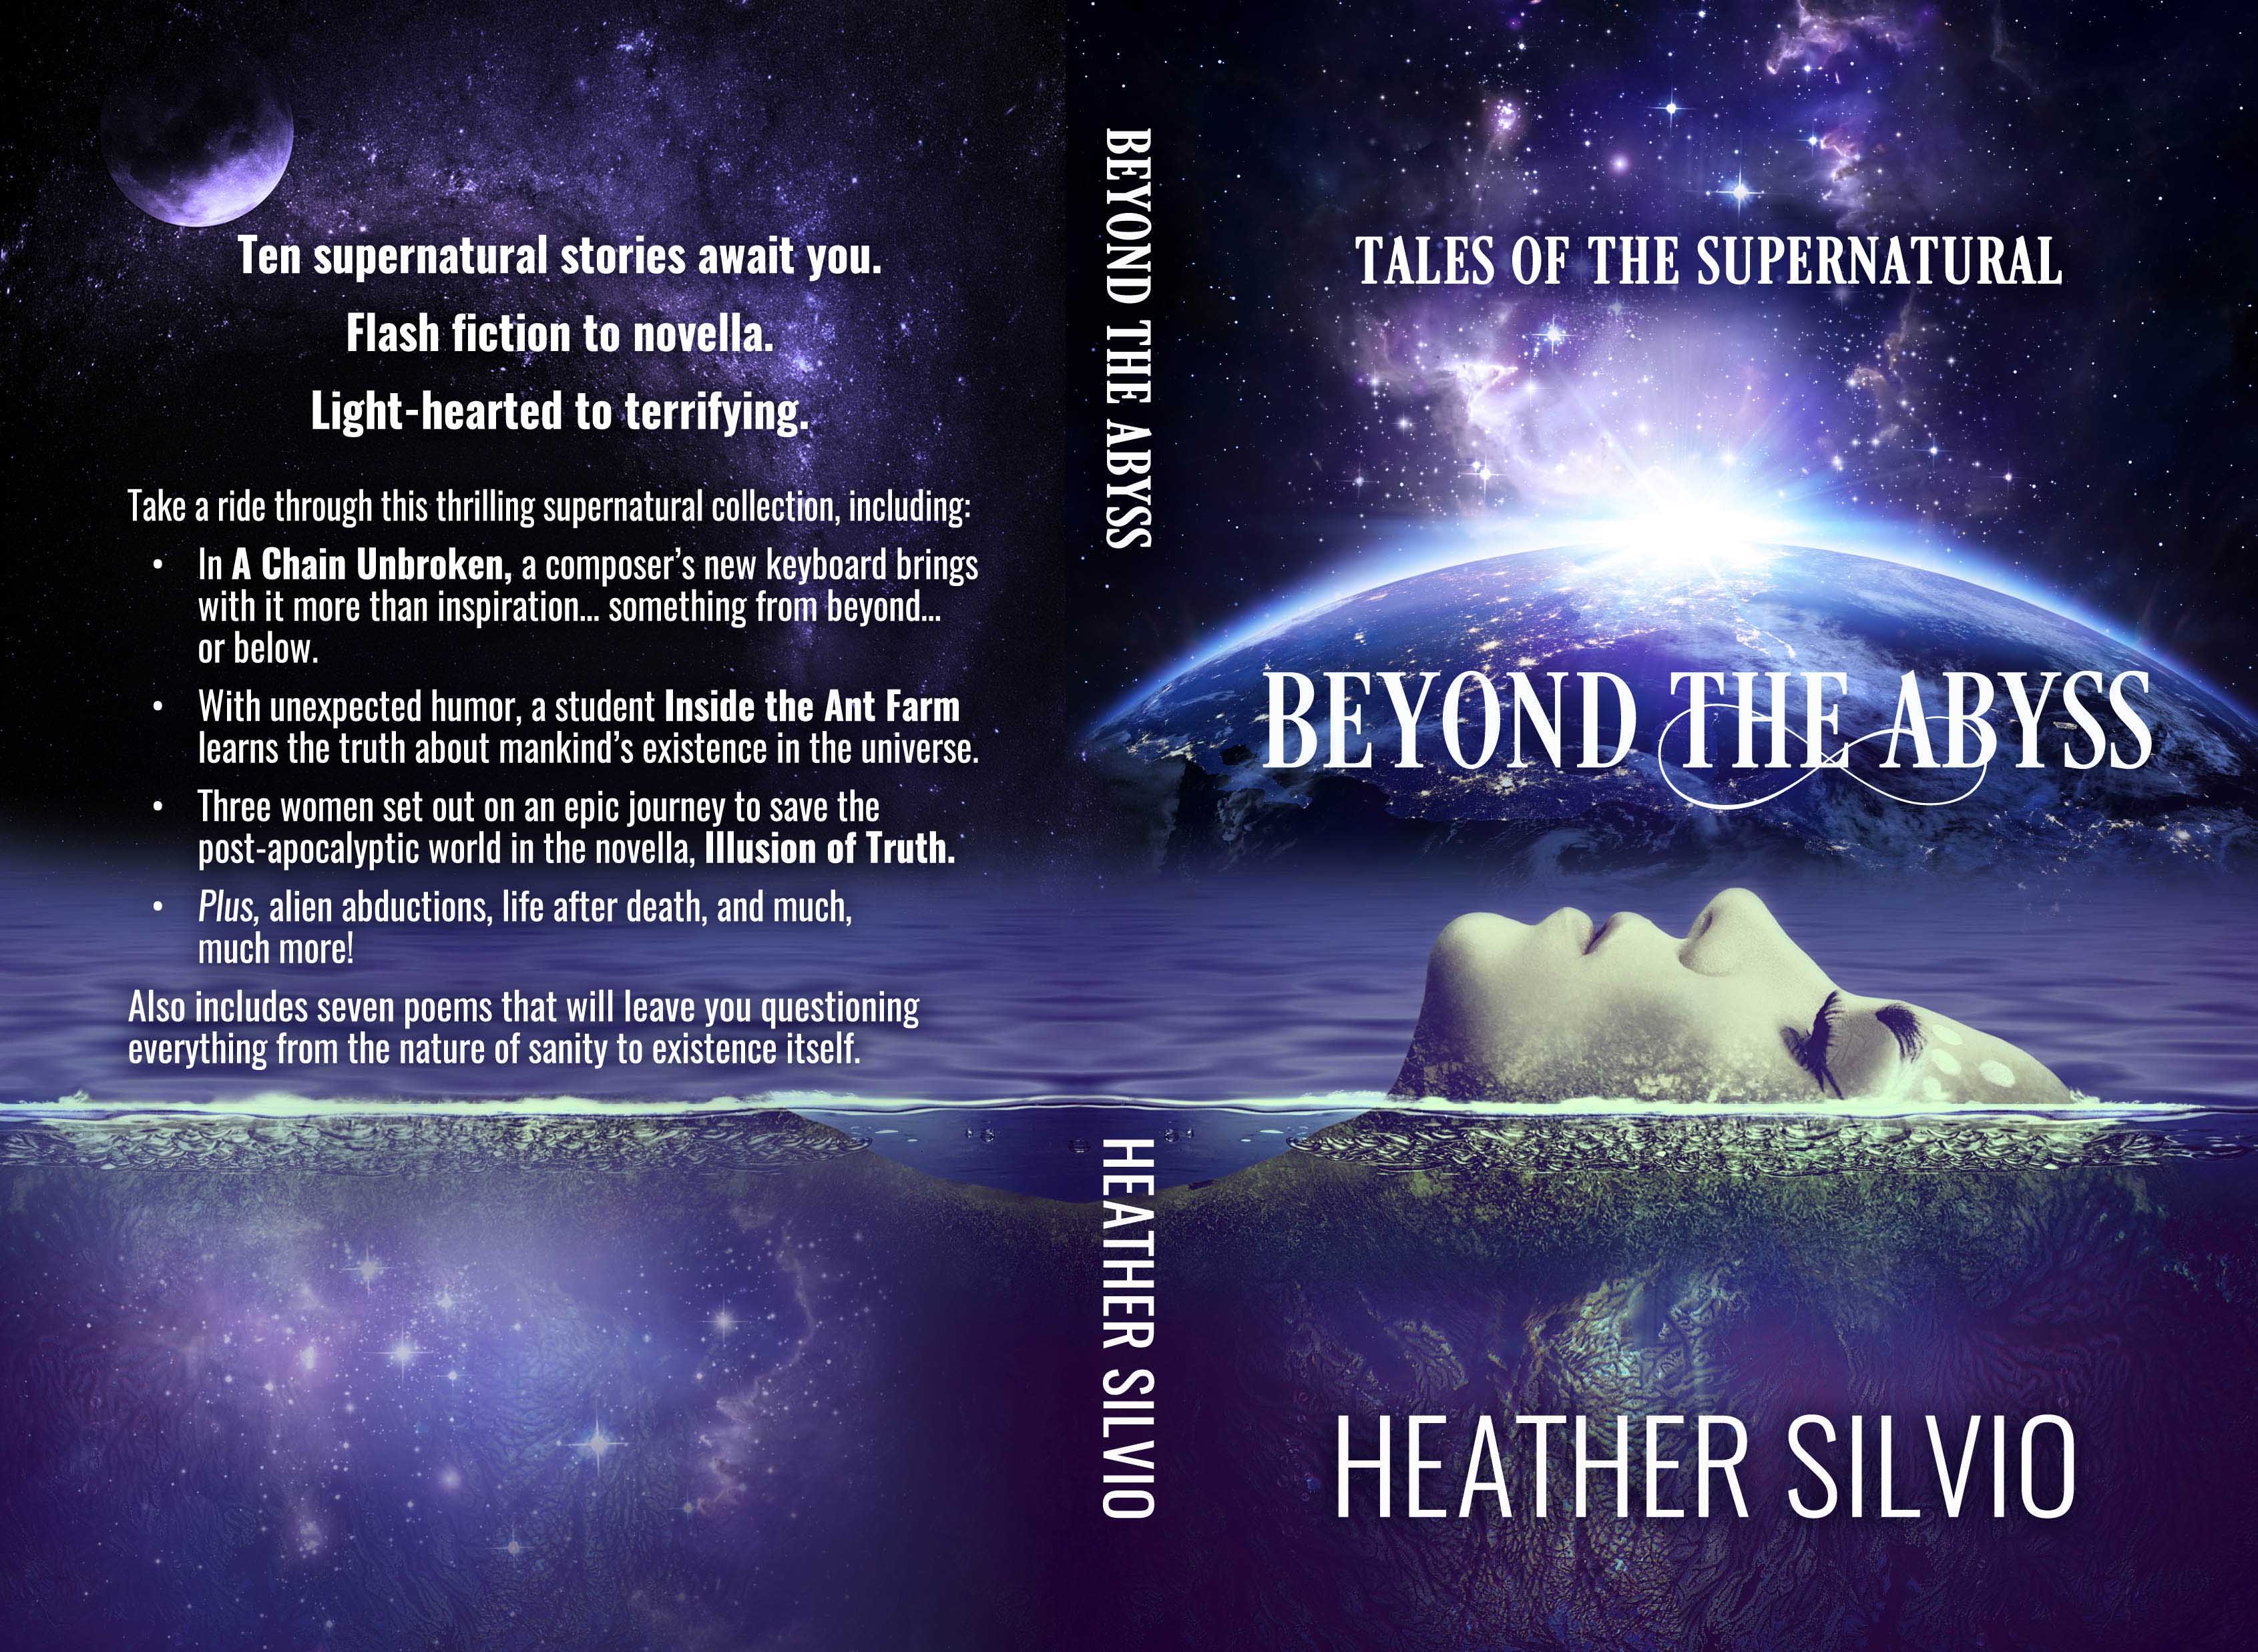 Beyond the Abyss Supernatural paperback